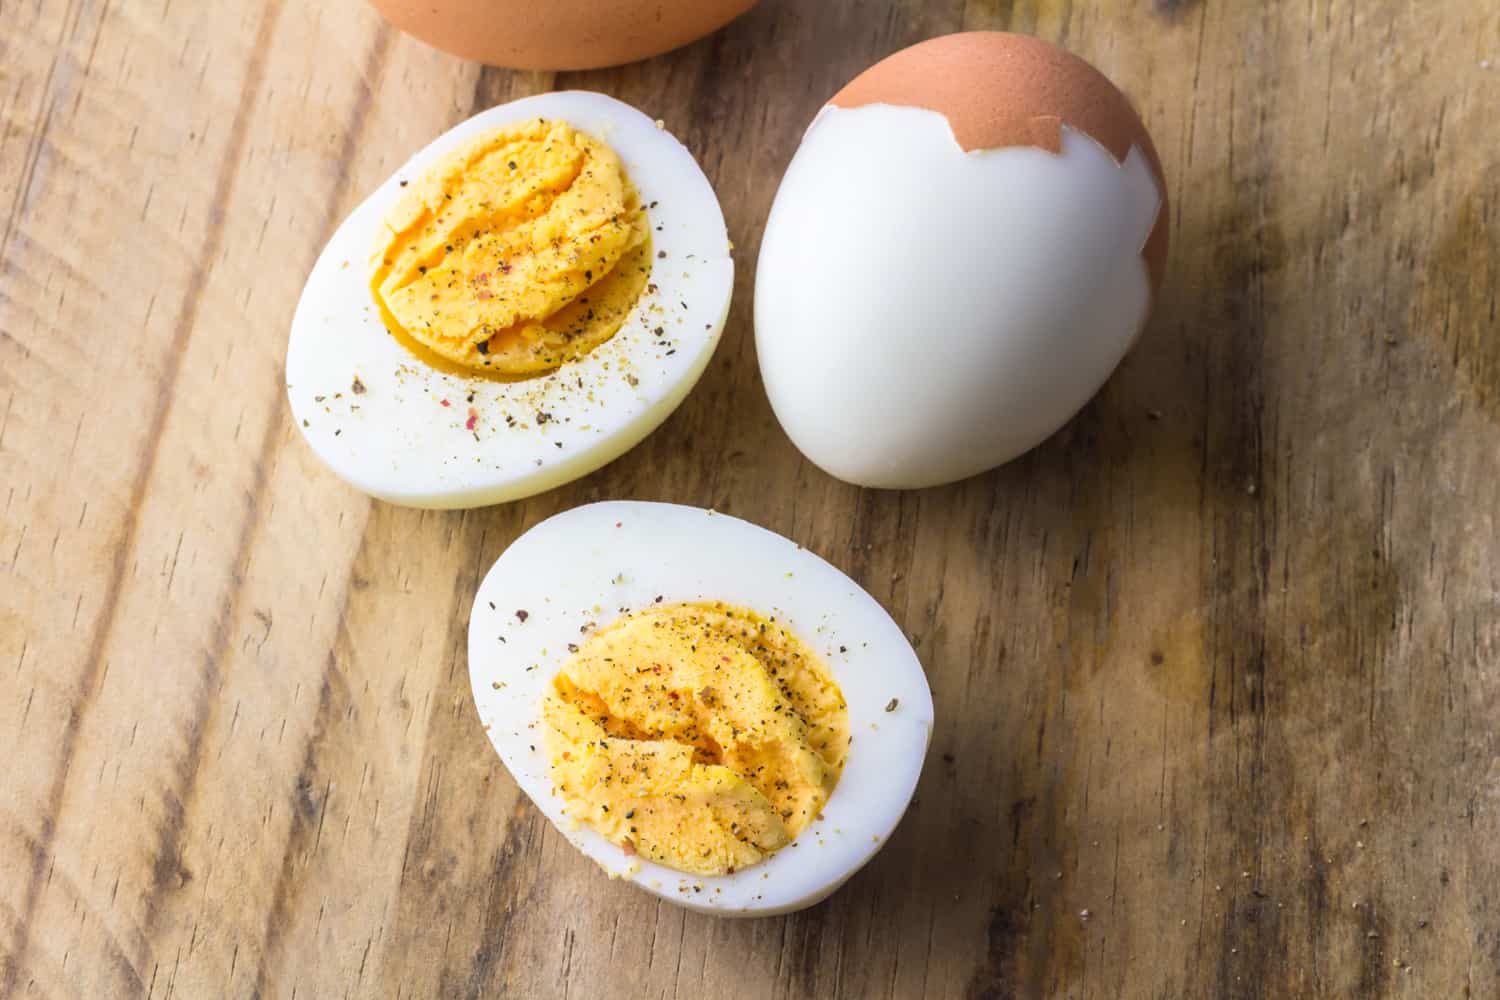 Boiled chicken eggs on wooden board with pepper flakes